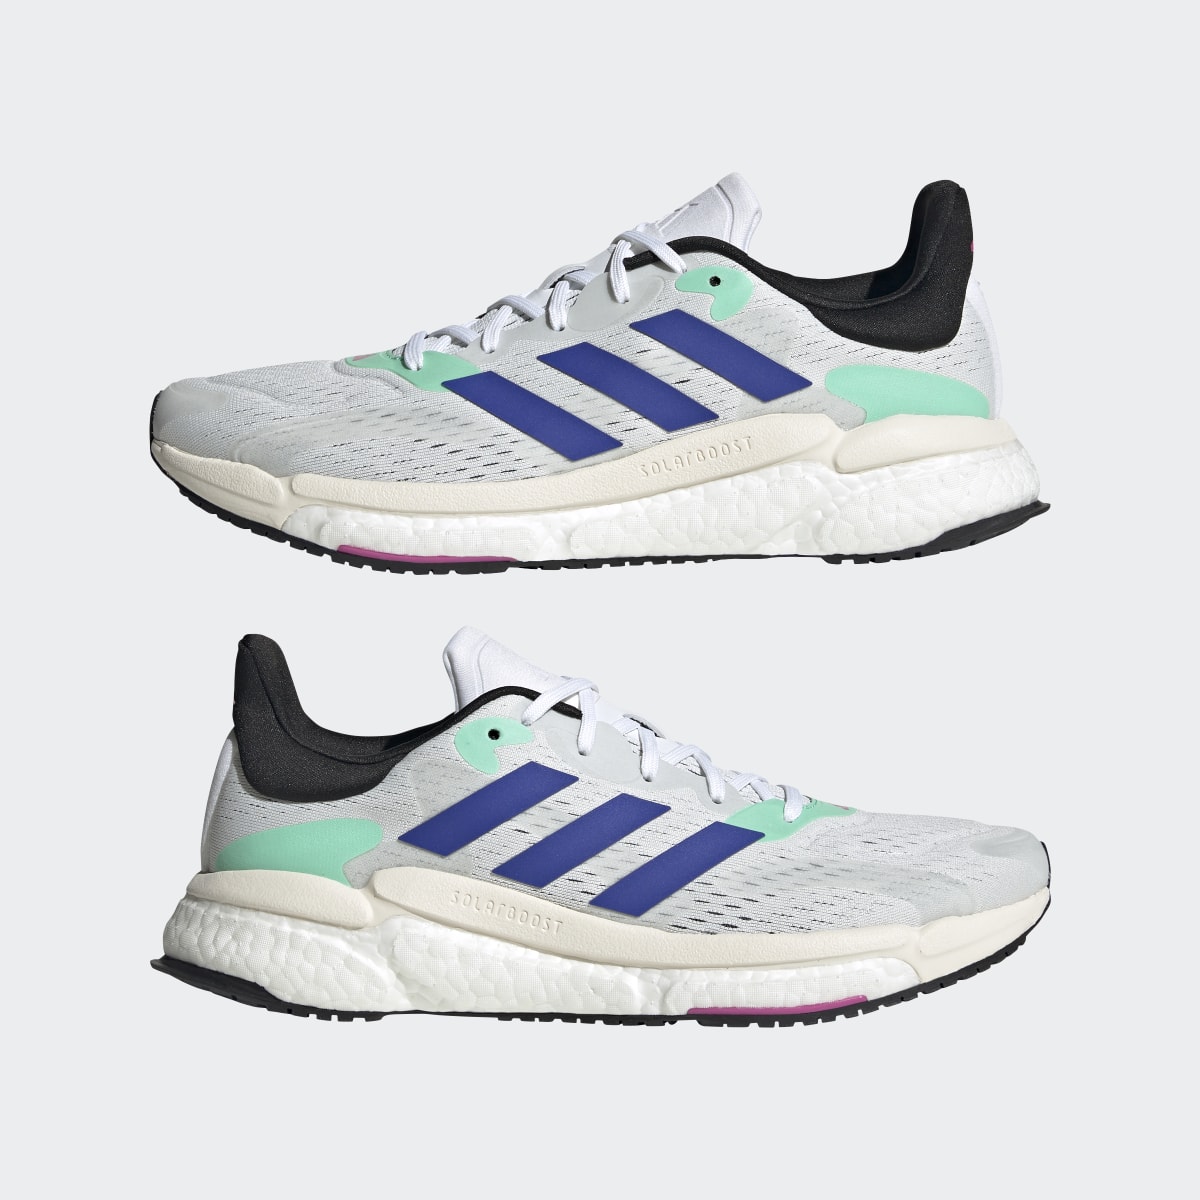 Adidas Solarboost 4 Shoes. 8